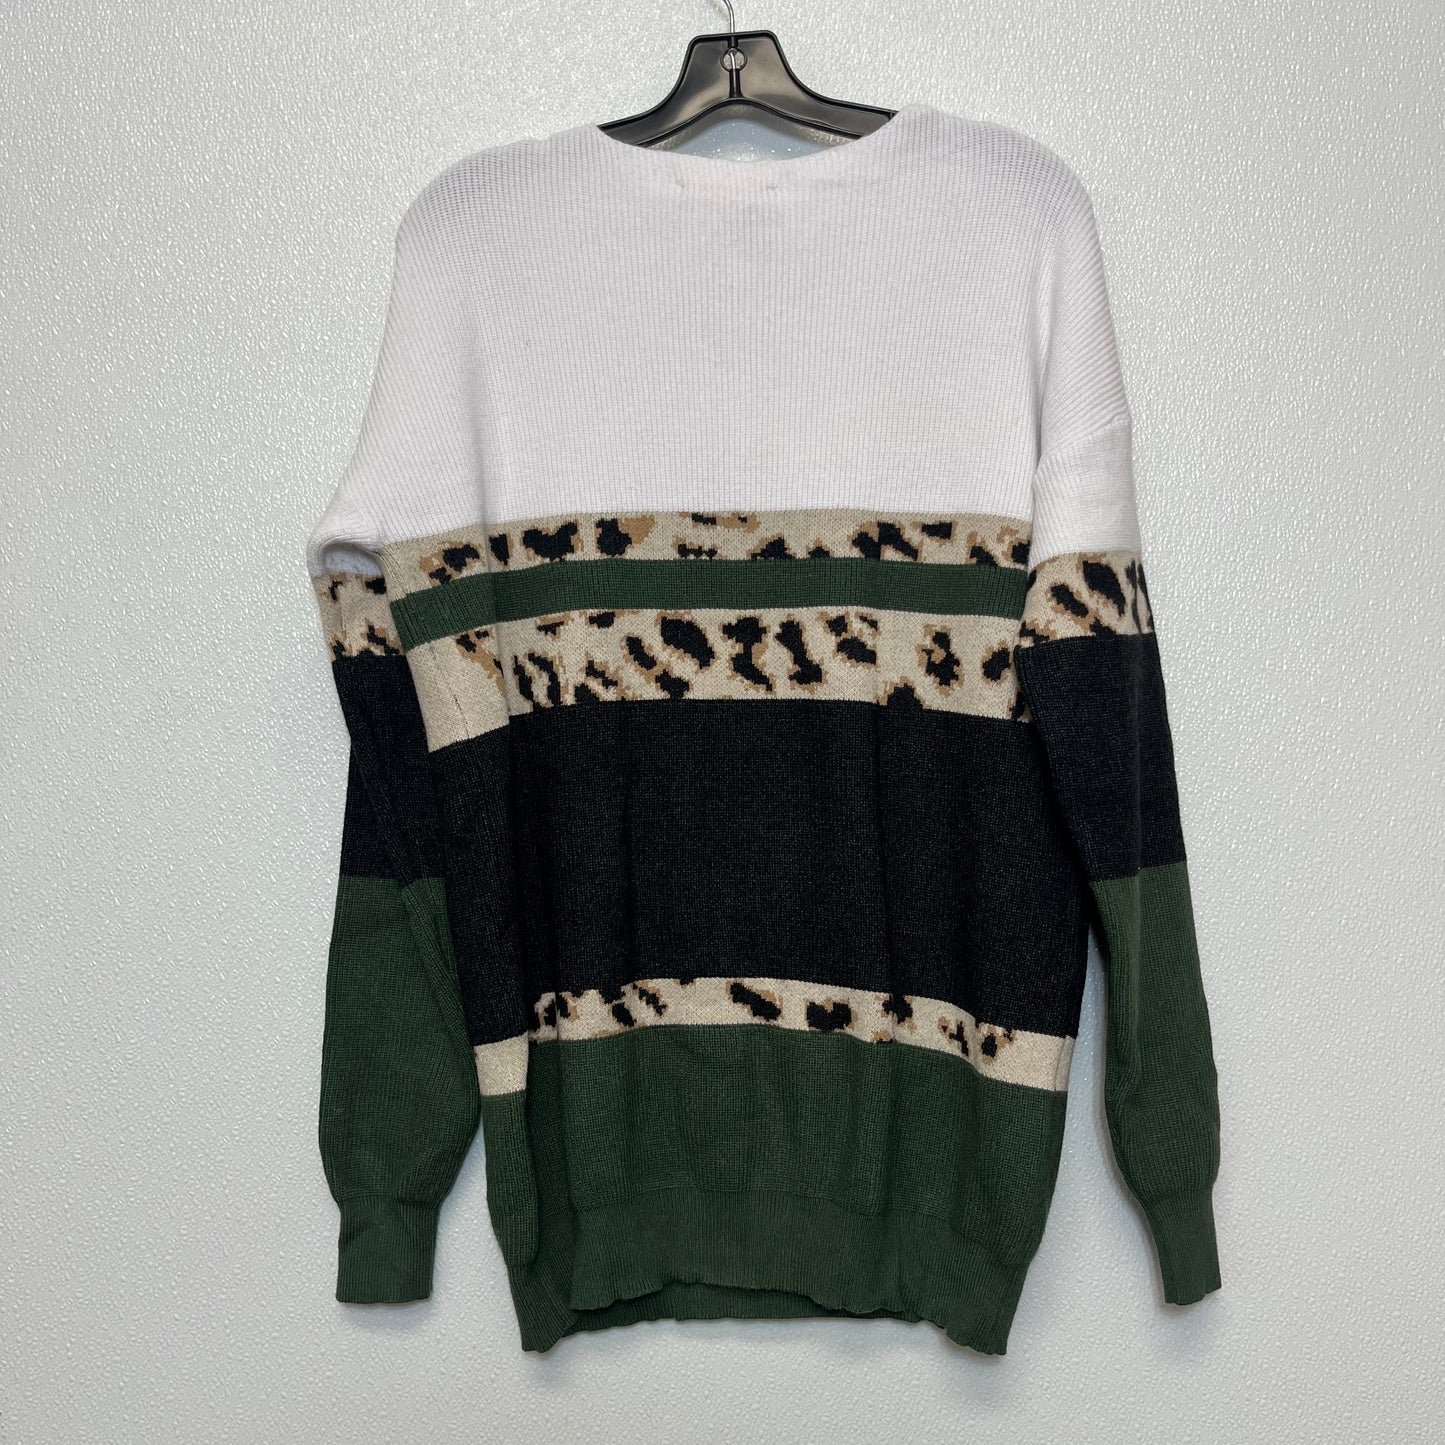 Sweater By Clothes Mentor  Size: M